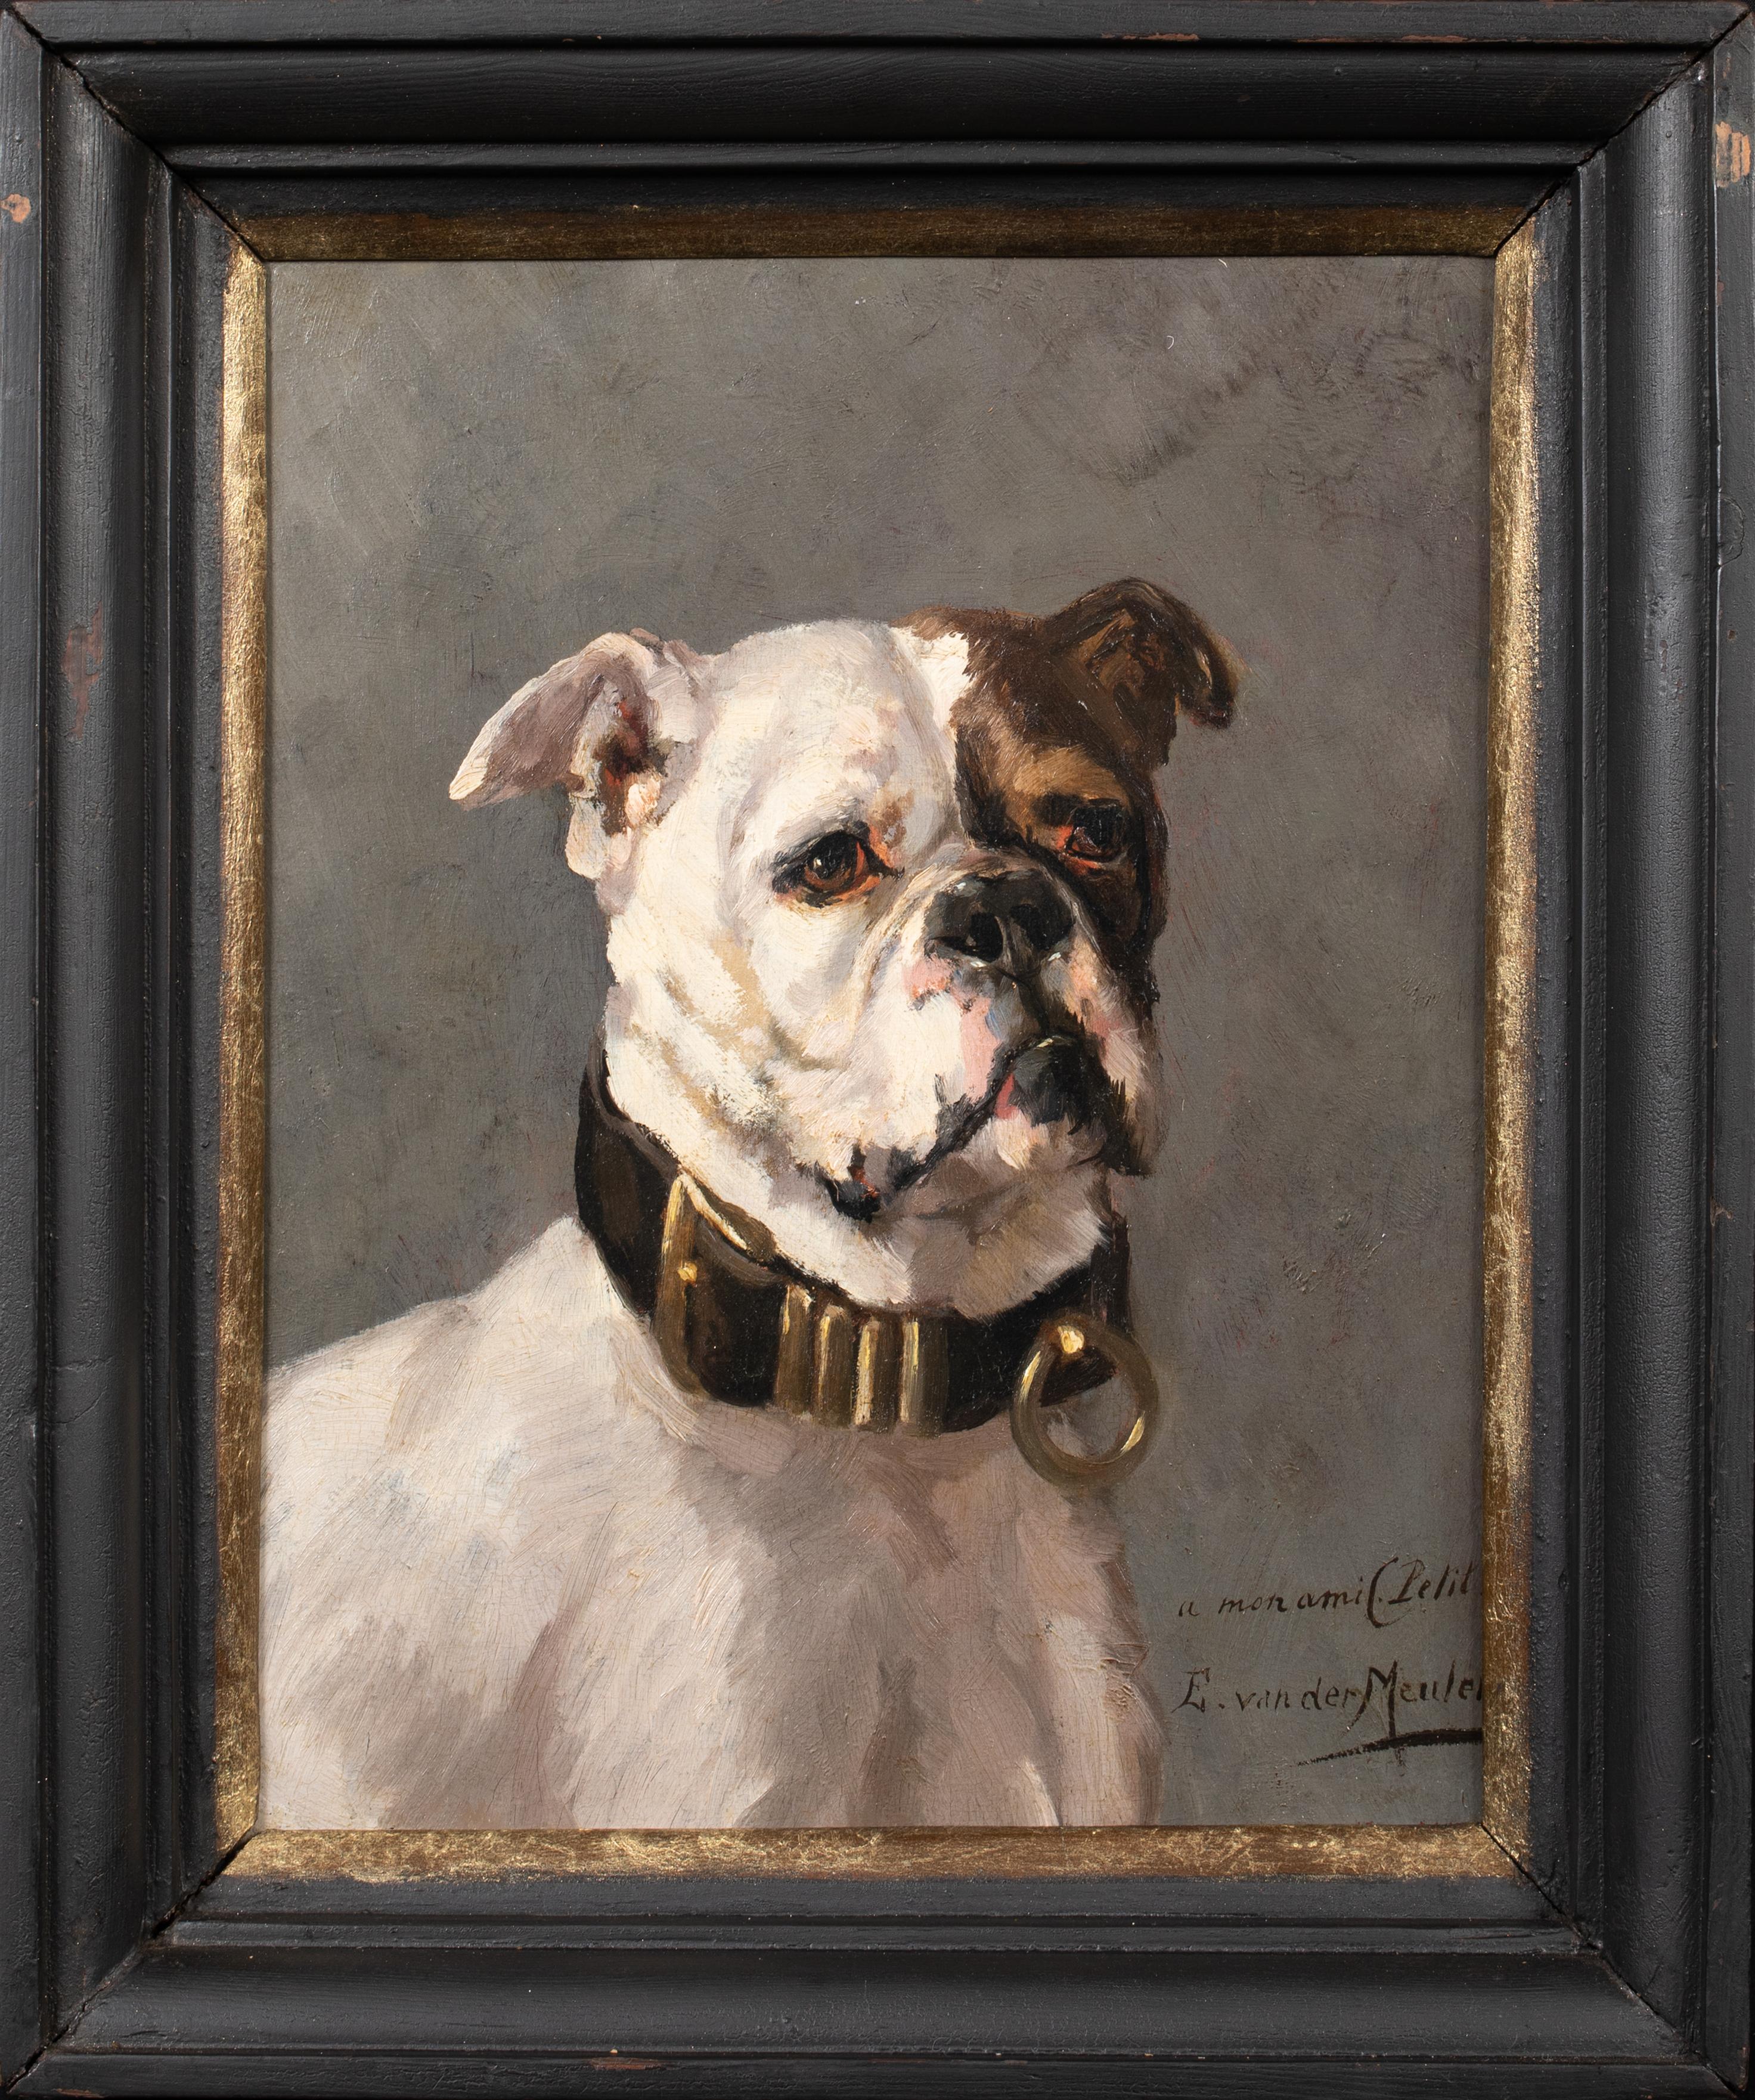 Portrait of An American Bulldog, 19th Century

by Edmond Van Der Meulen (1841-1905) - one of a pair

19th Century Portrait of an American Bulldog, oil on panel by Edmond Van Der Meulen. Early important and beautifully painted head profile of an